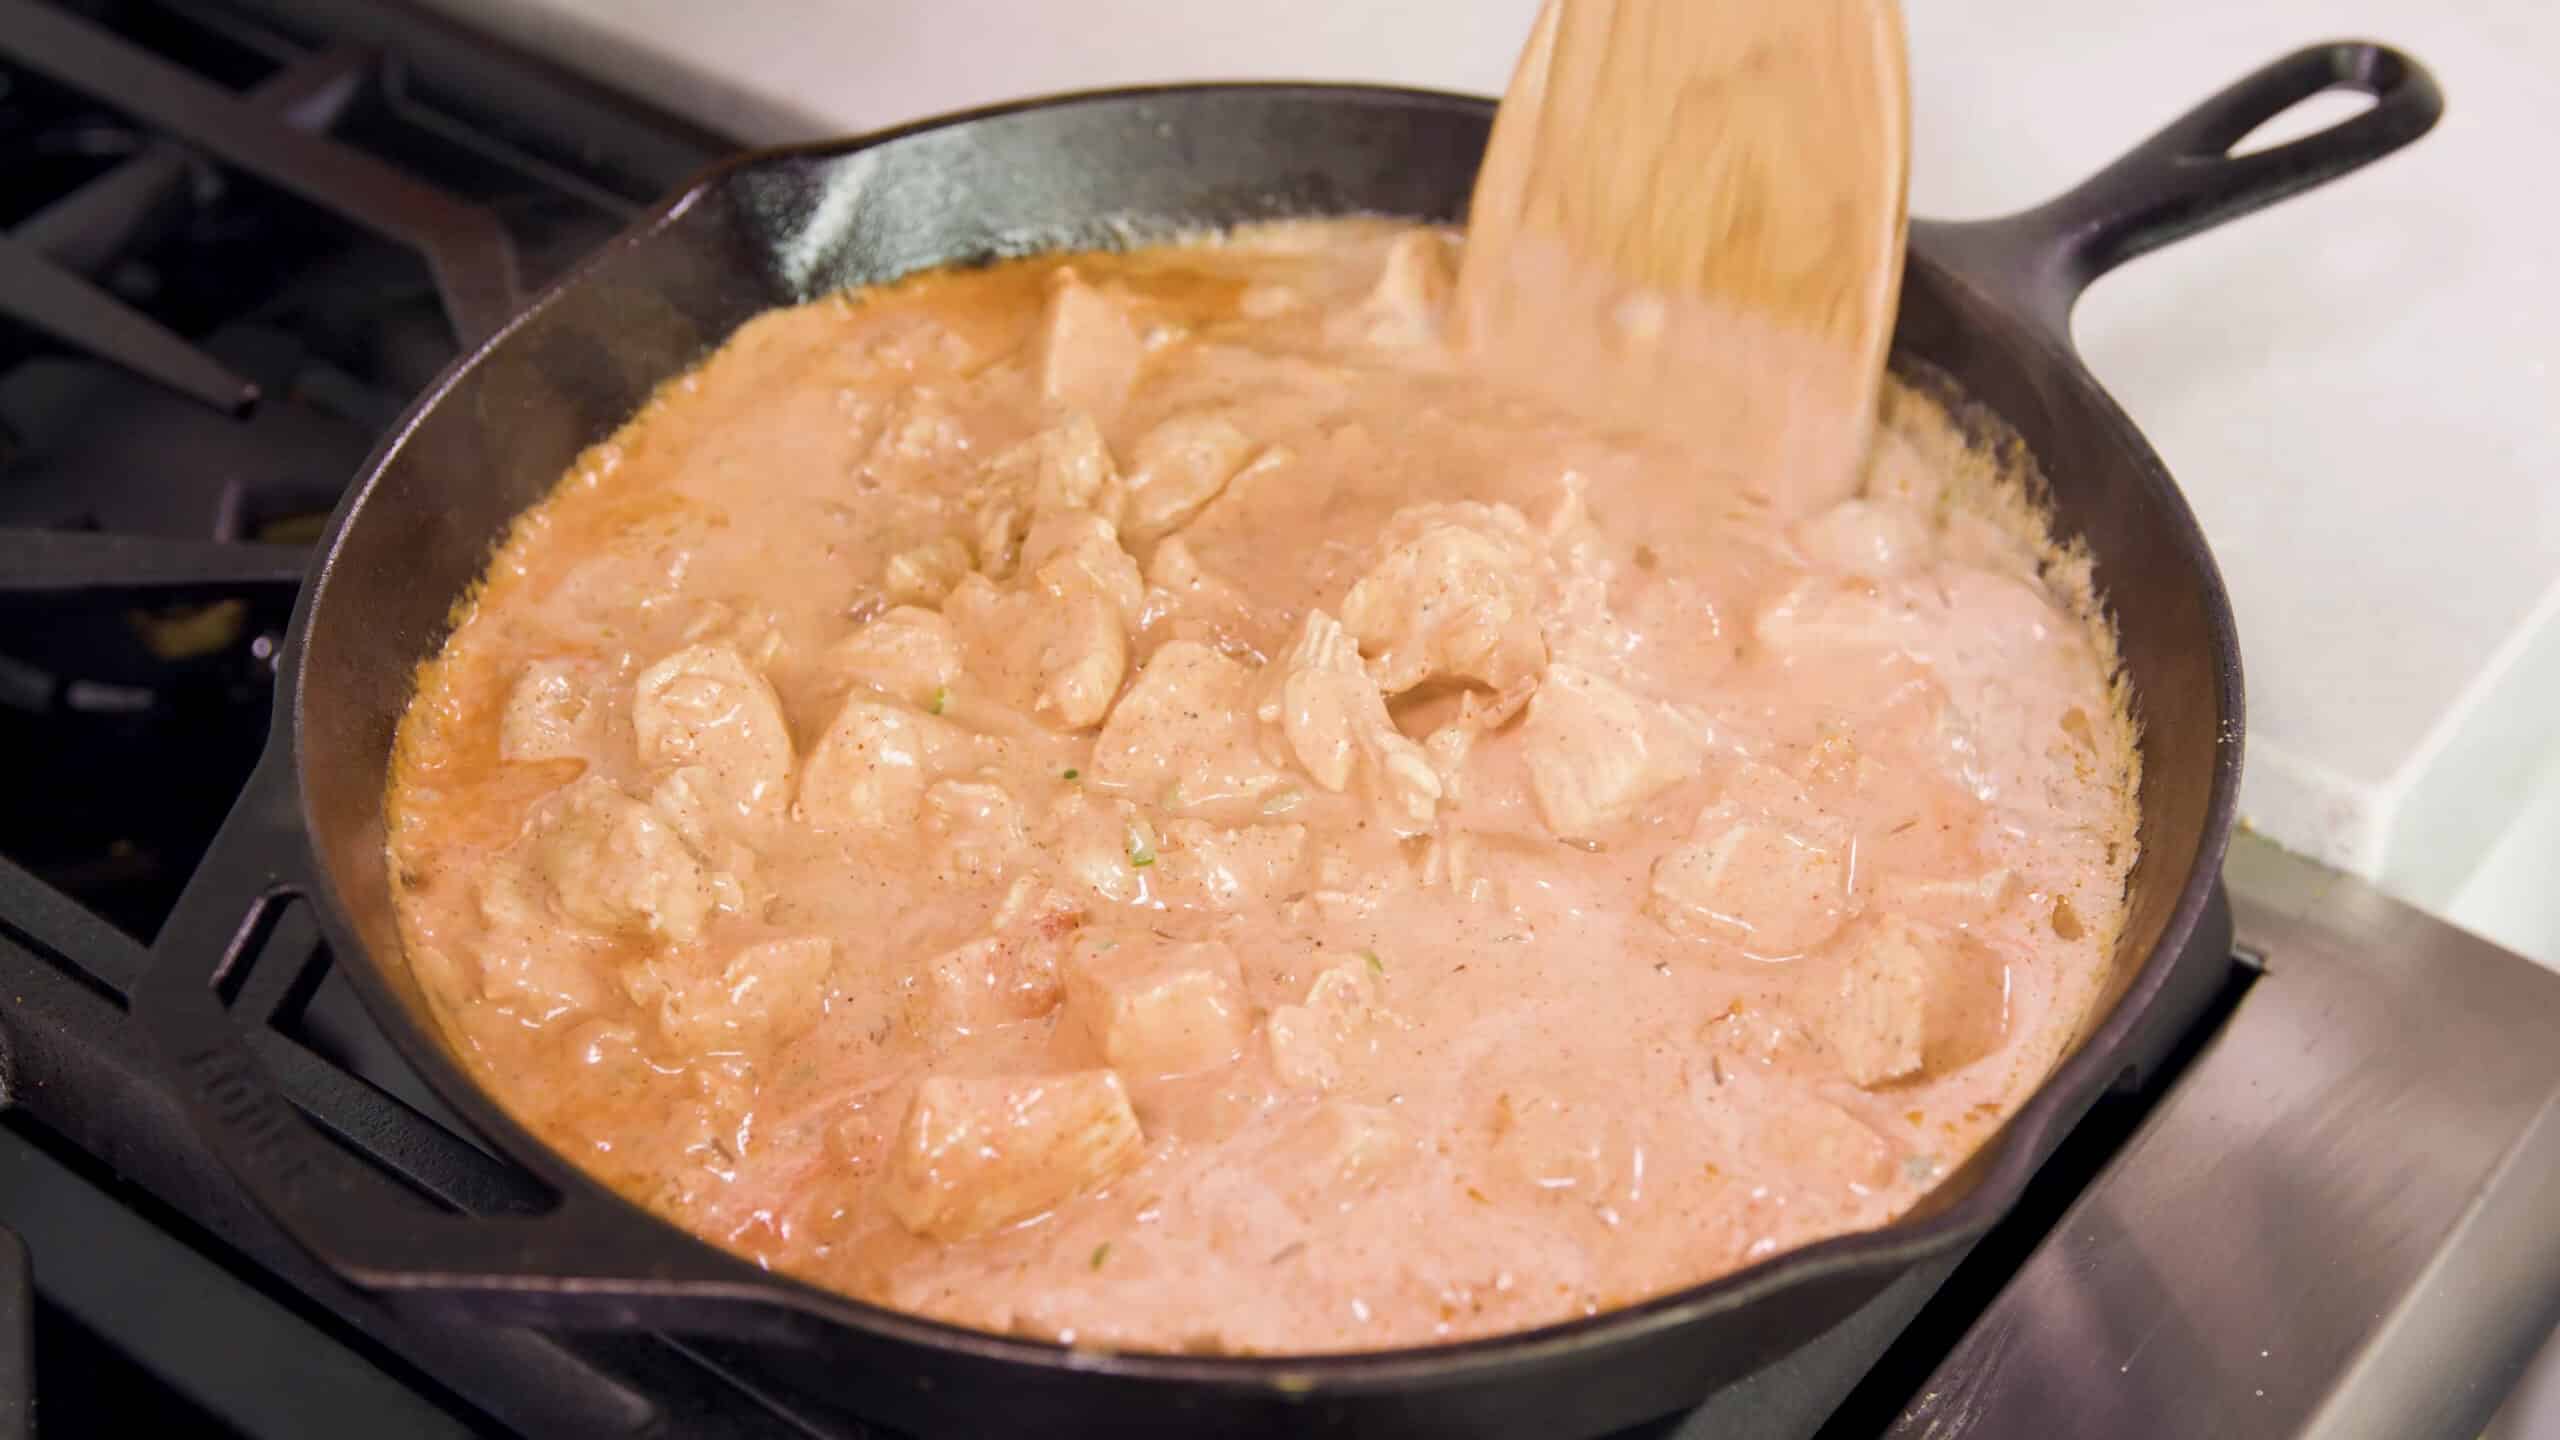 Angled view of cast iron skillet with the simmering liquid base combined with the marinaded chicken to create the Indian butter chicken dish.